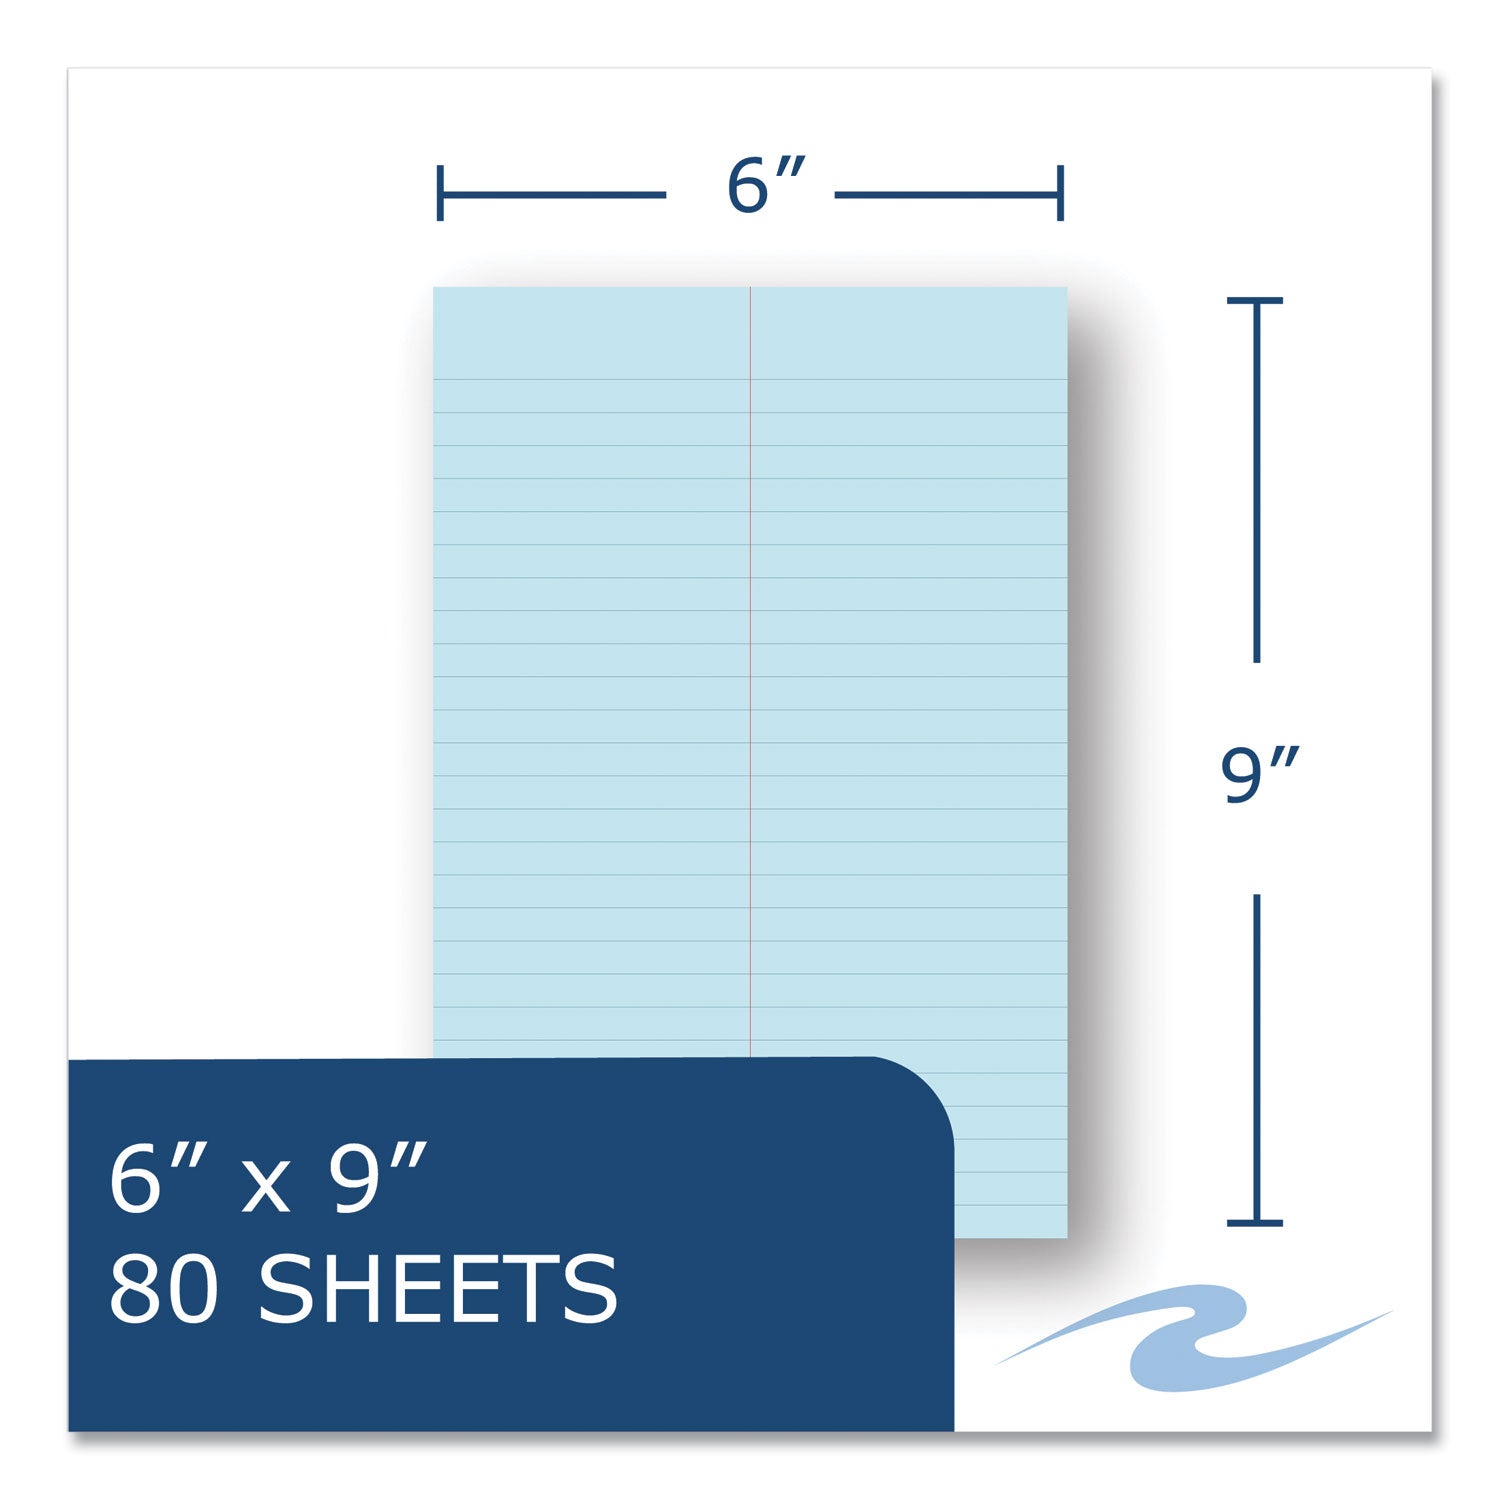 Enviroshades Steno Notepad, Gregg Rule, White Cover, 80 Blue 6 x 9 Sheets, 4/Pack - 